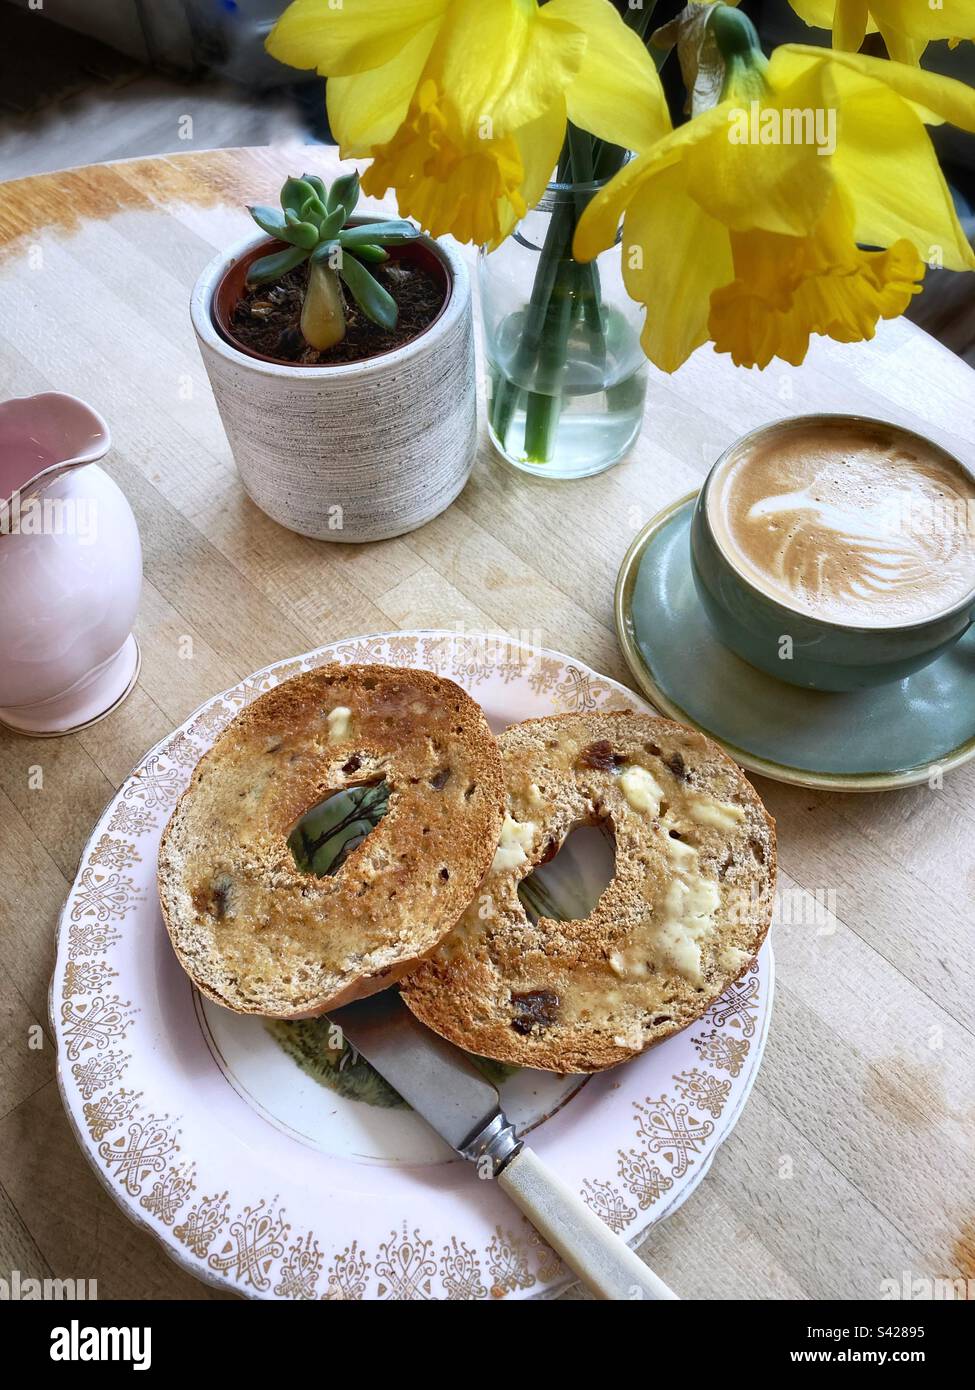 Flat white coffee and a toasted cinnamon bagel on a table with daffodils Stock Photo